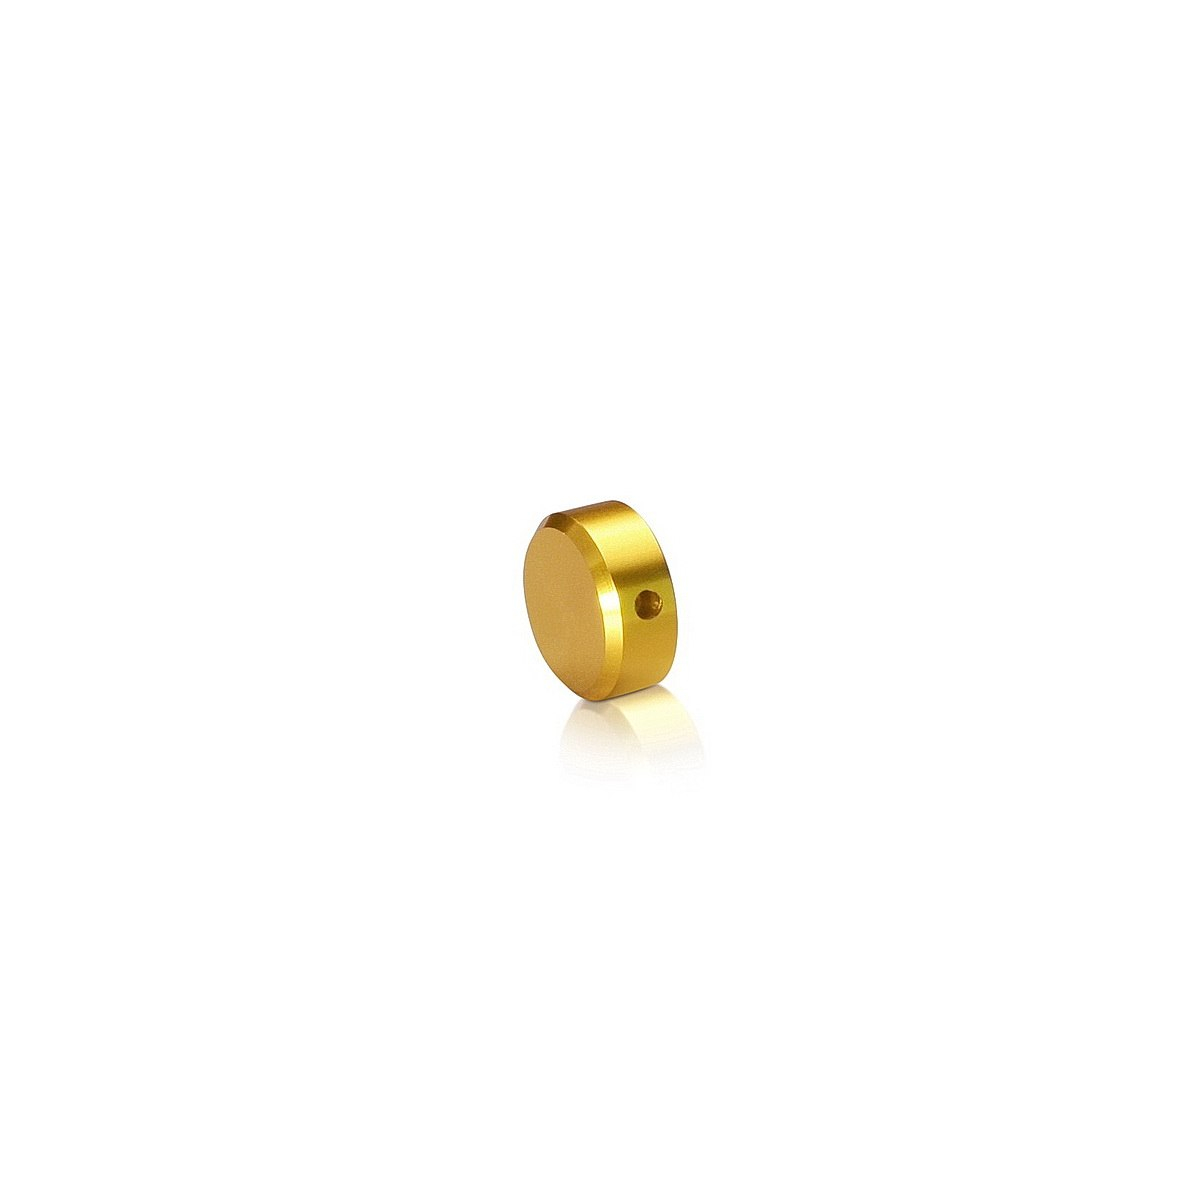 1/4-20 Threaded Locking Caps Diameter: 5/8'', Height: 1/4'', Gold Anodized Aluminum [Required Material Hole Size: 5/16'']